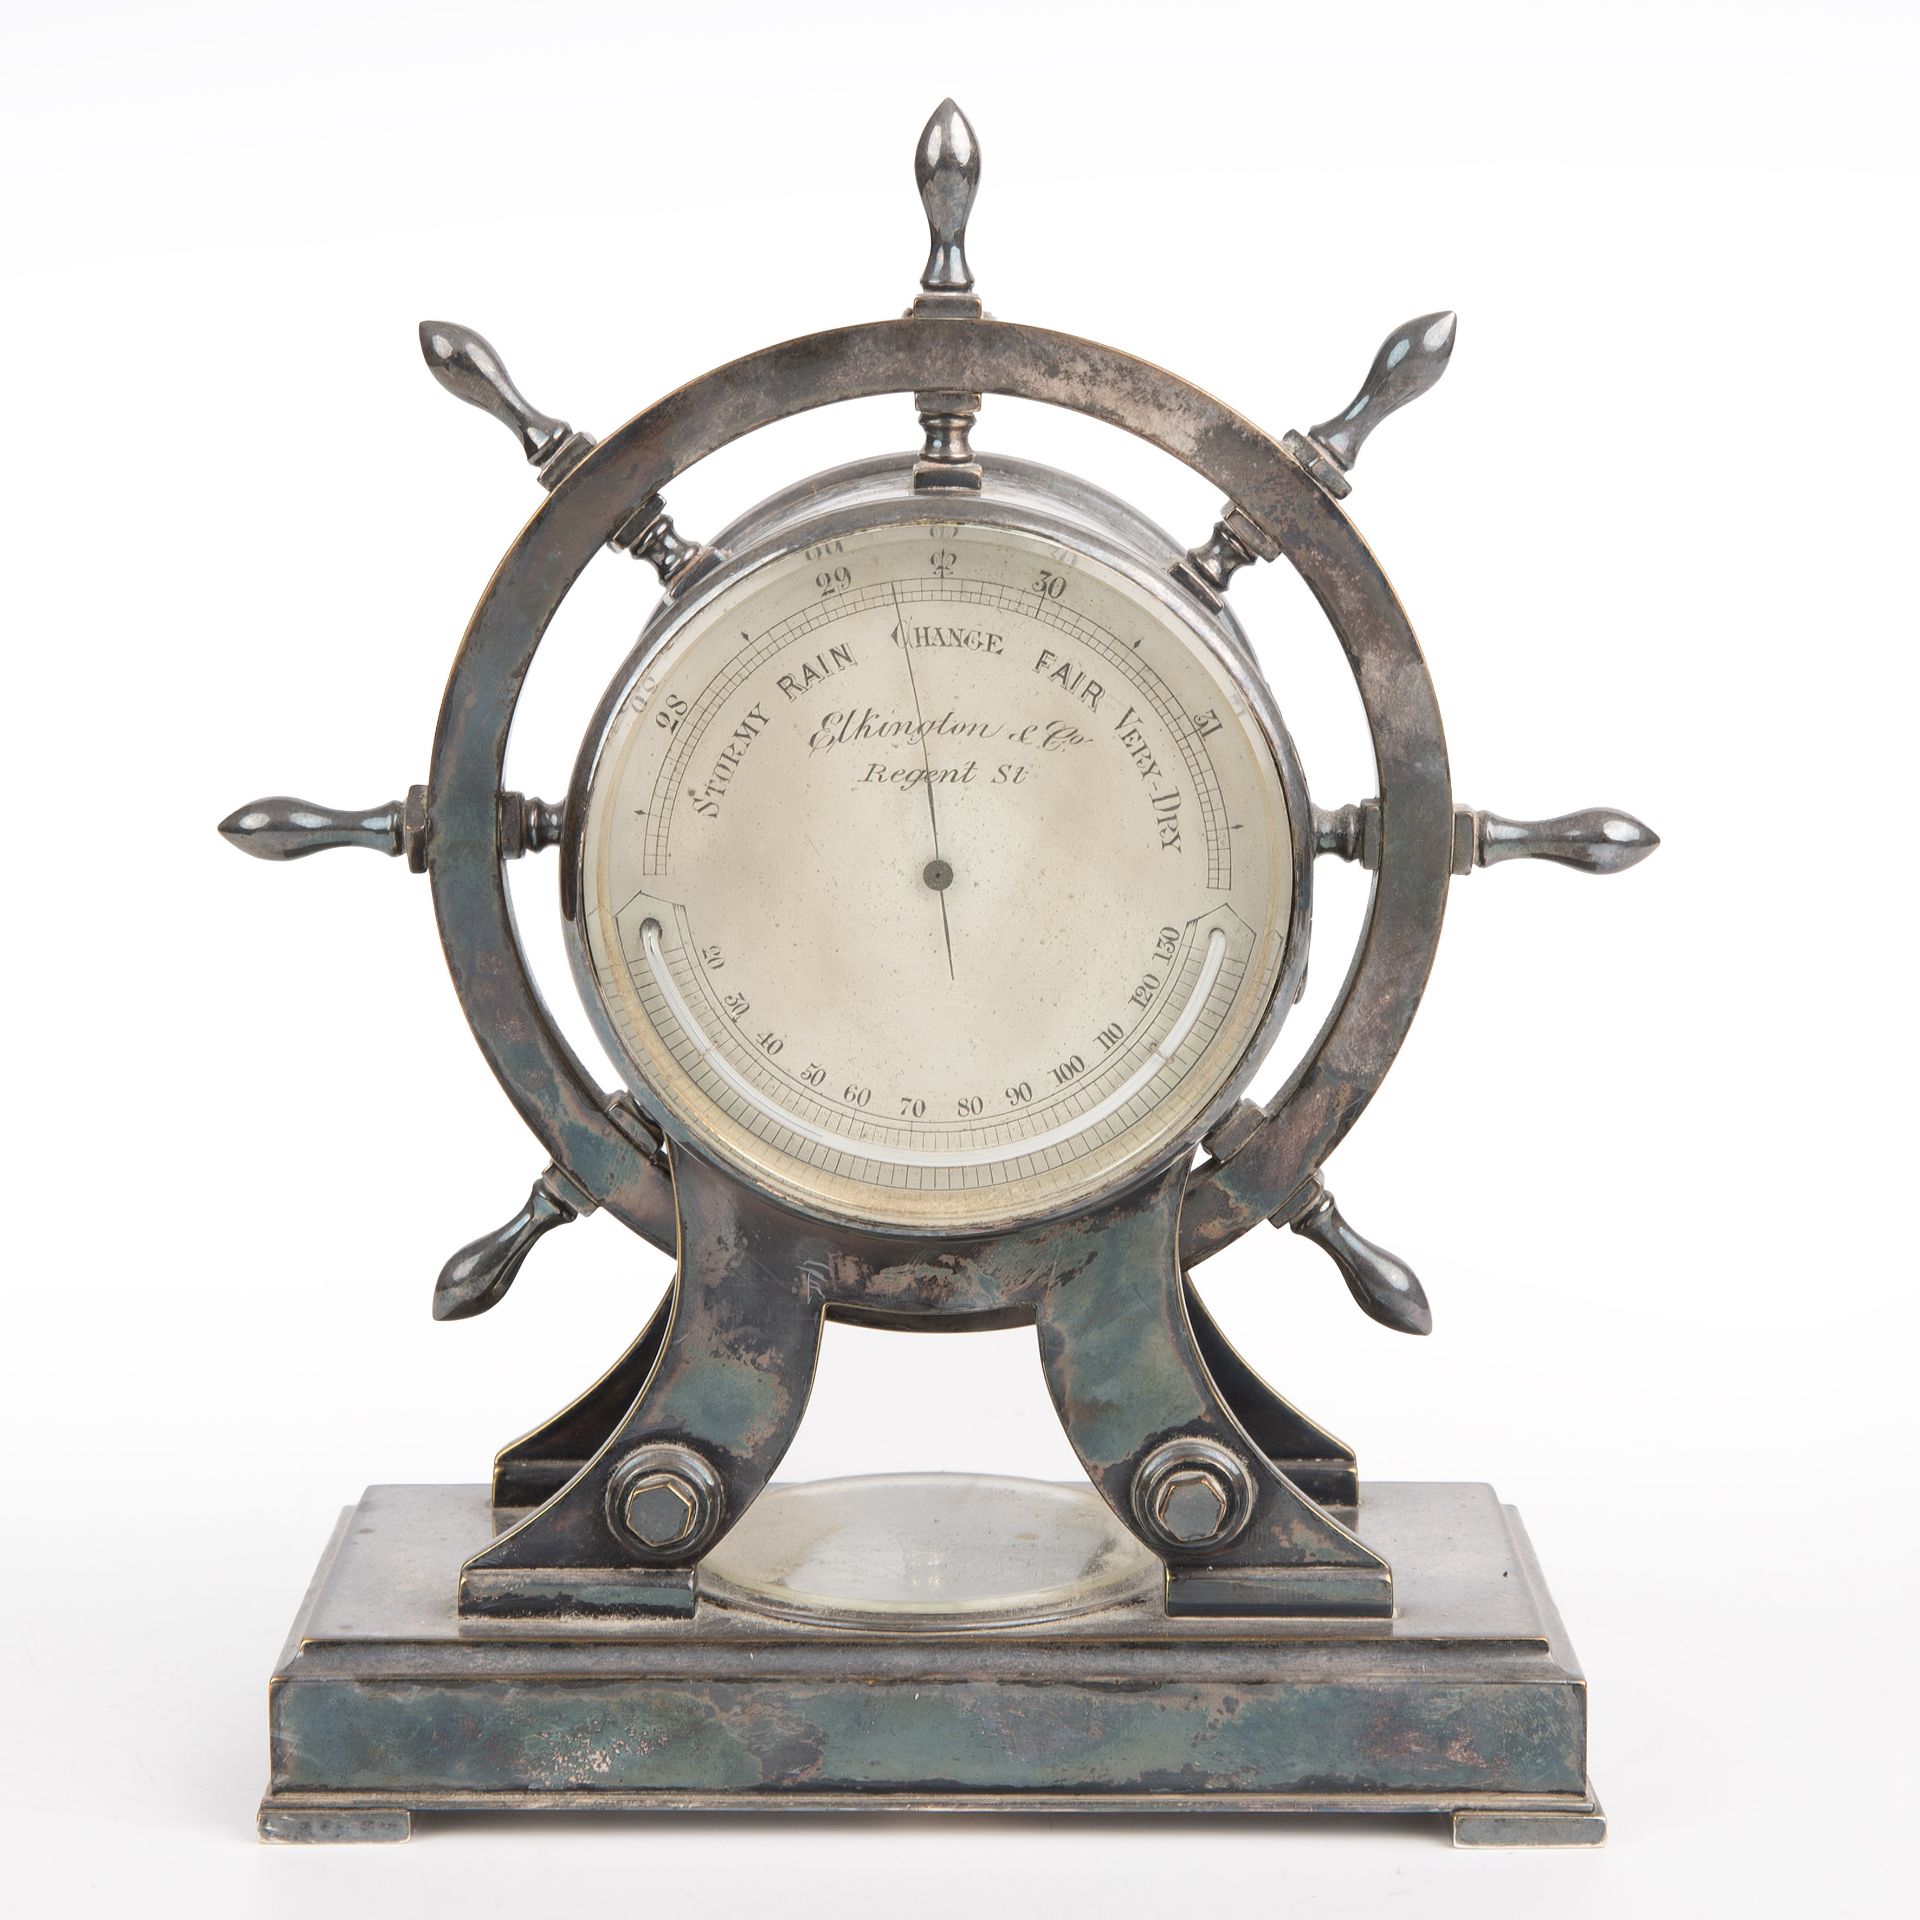 A Victorian silver plated novelty ships timepiece/barometer by Elkington and Co, awarded to Lord - Image 2 of 4